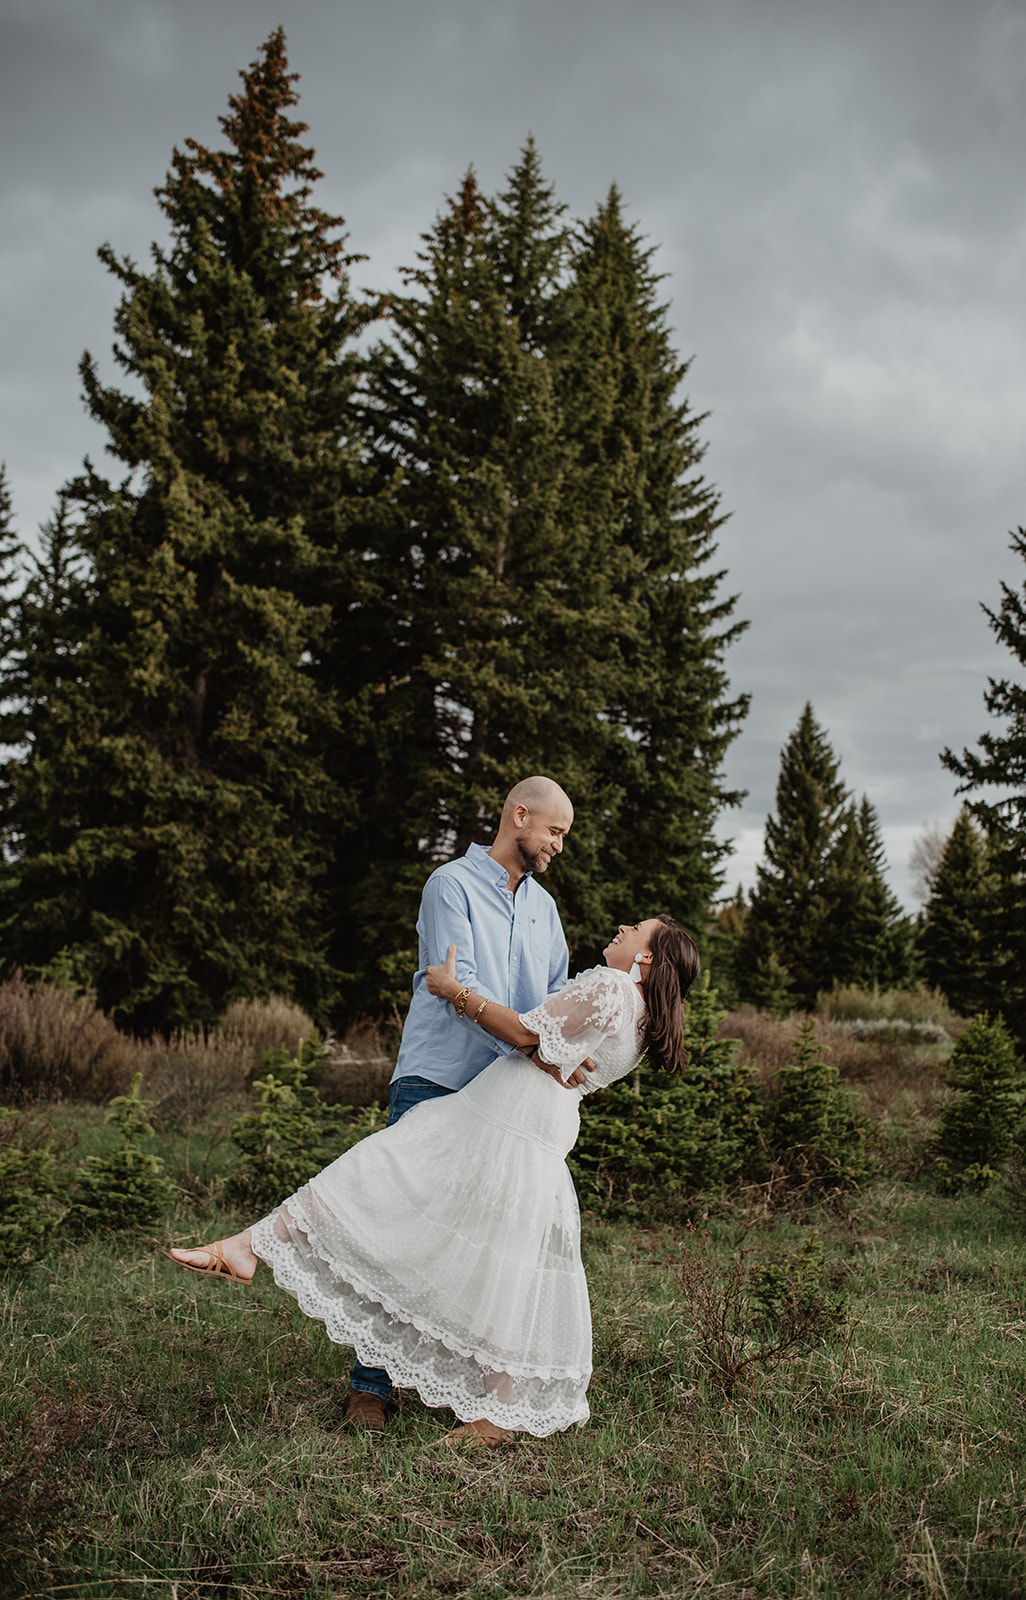 Rainy Day Photos In The Tetons anniversary session with husband dipping his wife and they dance together in front of tall pine trees